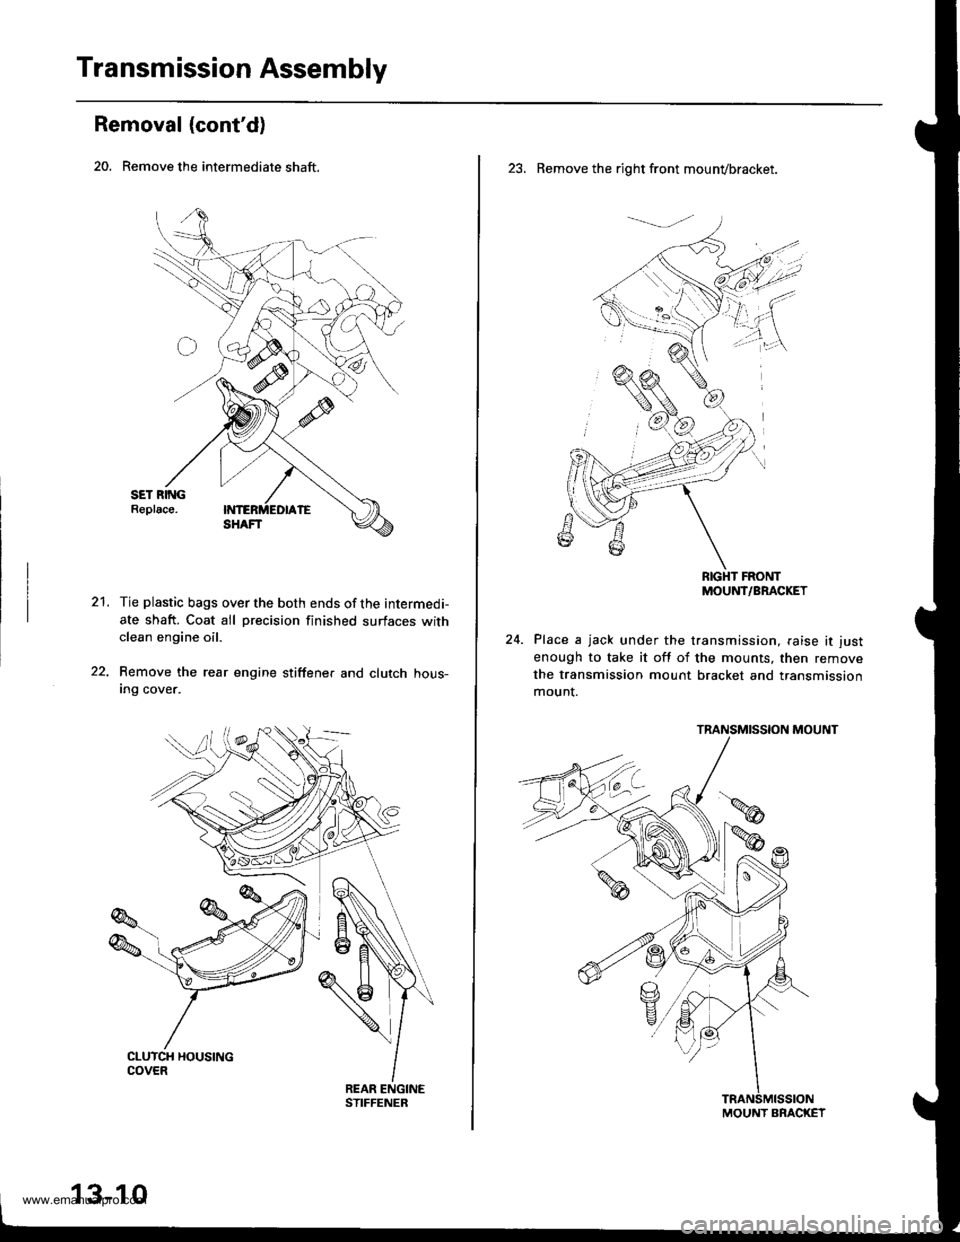 HONDA CR-V 2000 RD1-RD3 / 1.G Service Manual 
Transmission Assembly
Removal (contd)
20. Remove the intermediate shaft.
21.Tie plastic bags over the both ends of the intermedi-
ate shaft. Coat all precision finished surfaces withclean engine oil